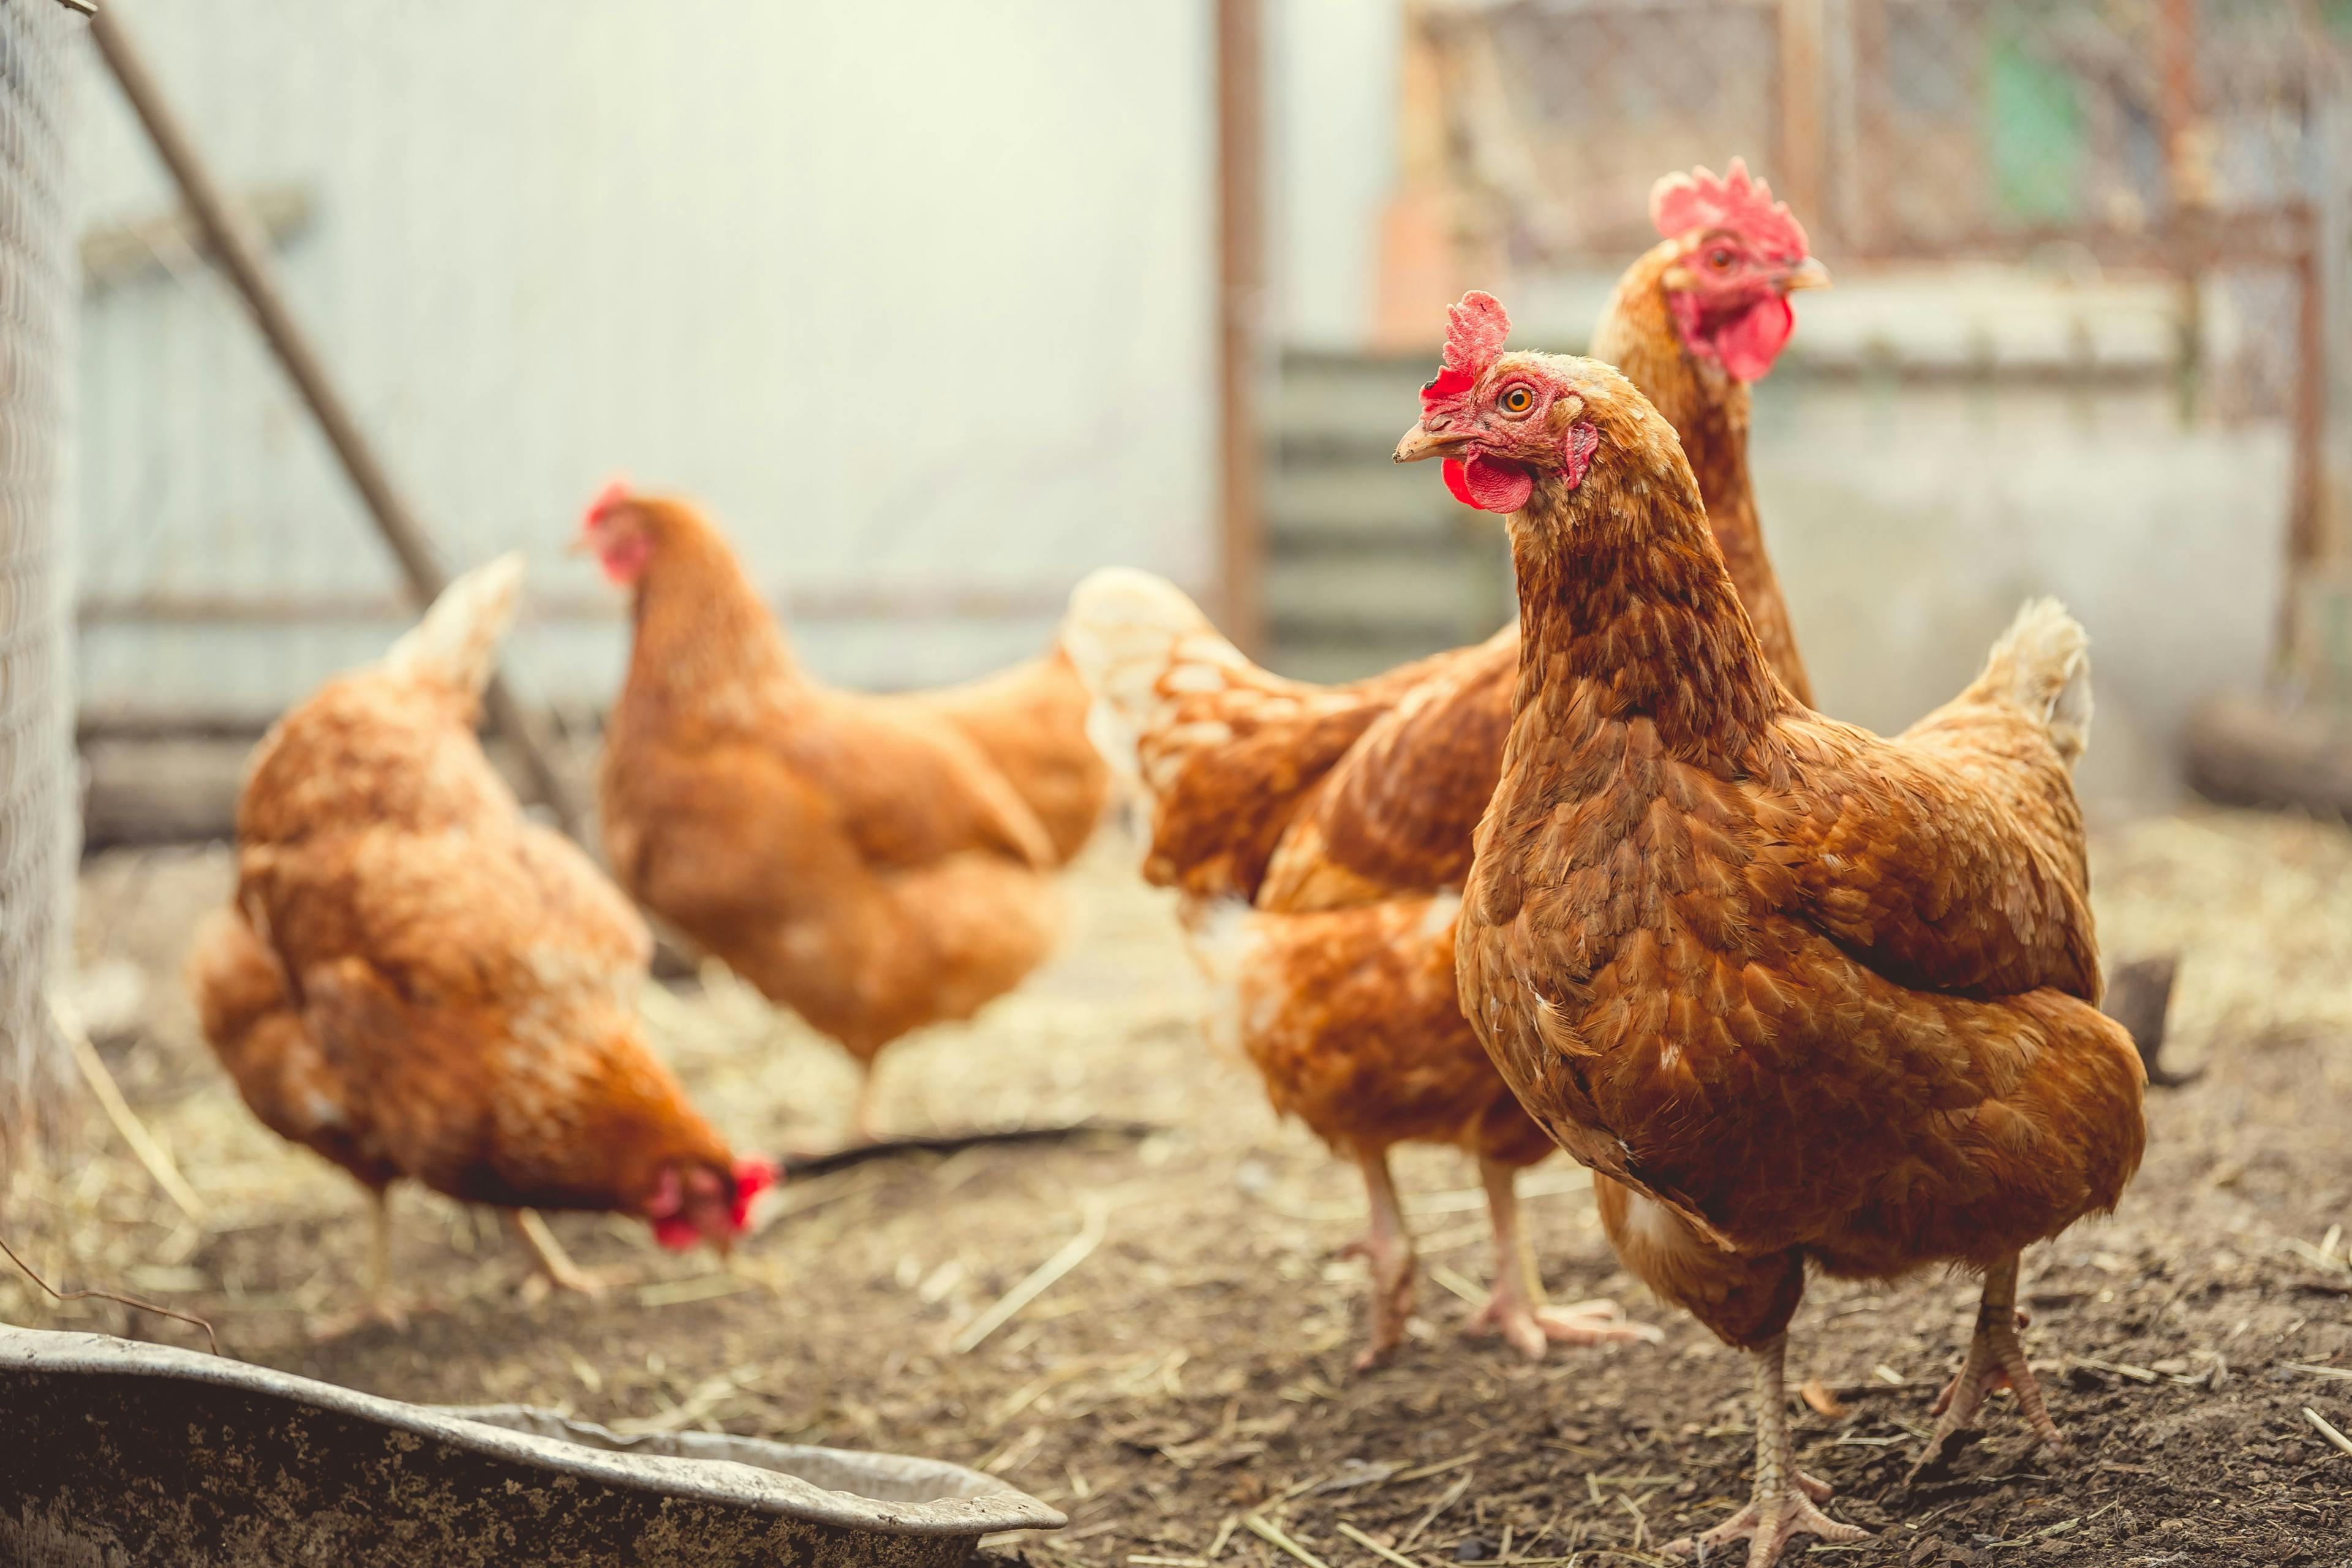 USDA develops new standards for organic livestock and poultry production